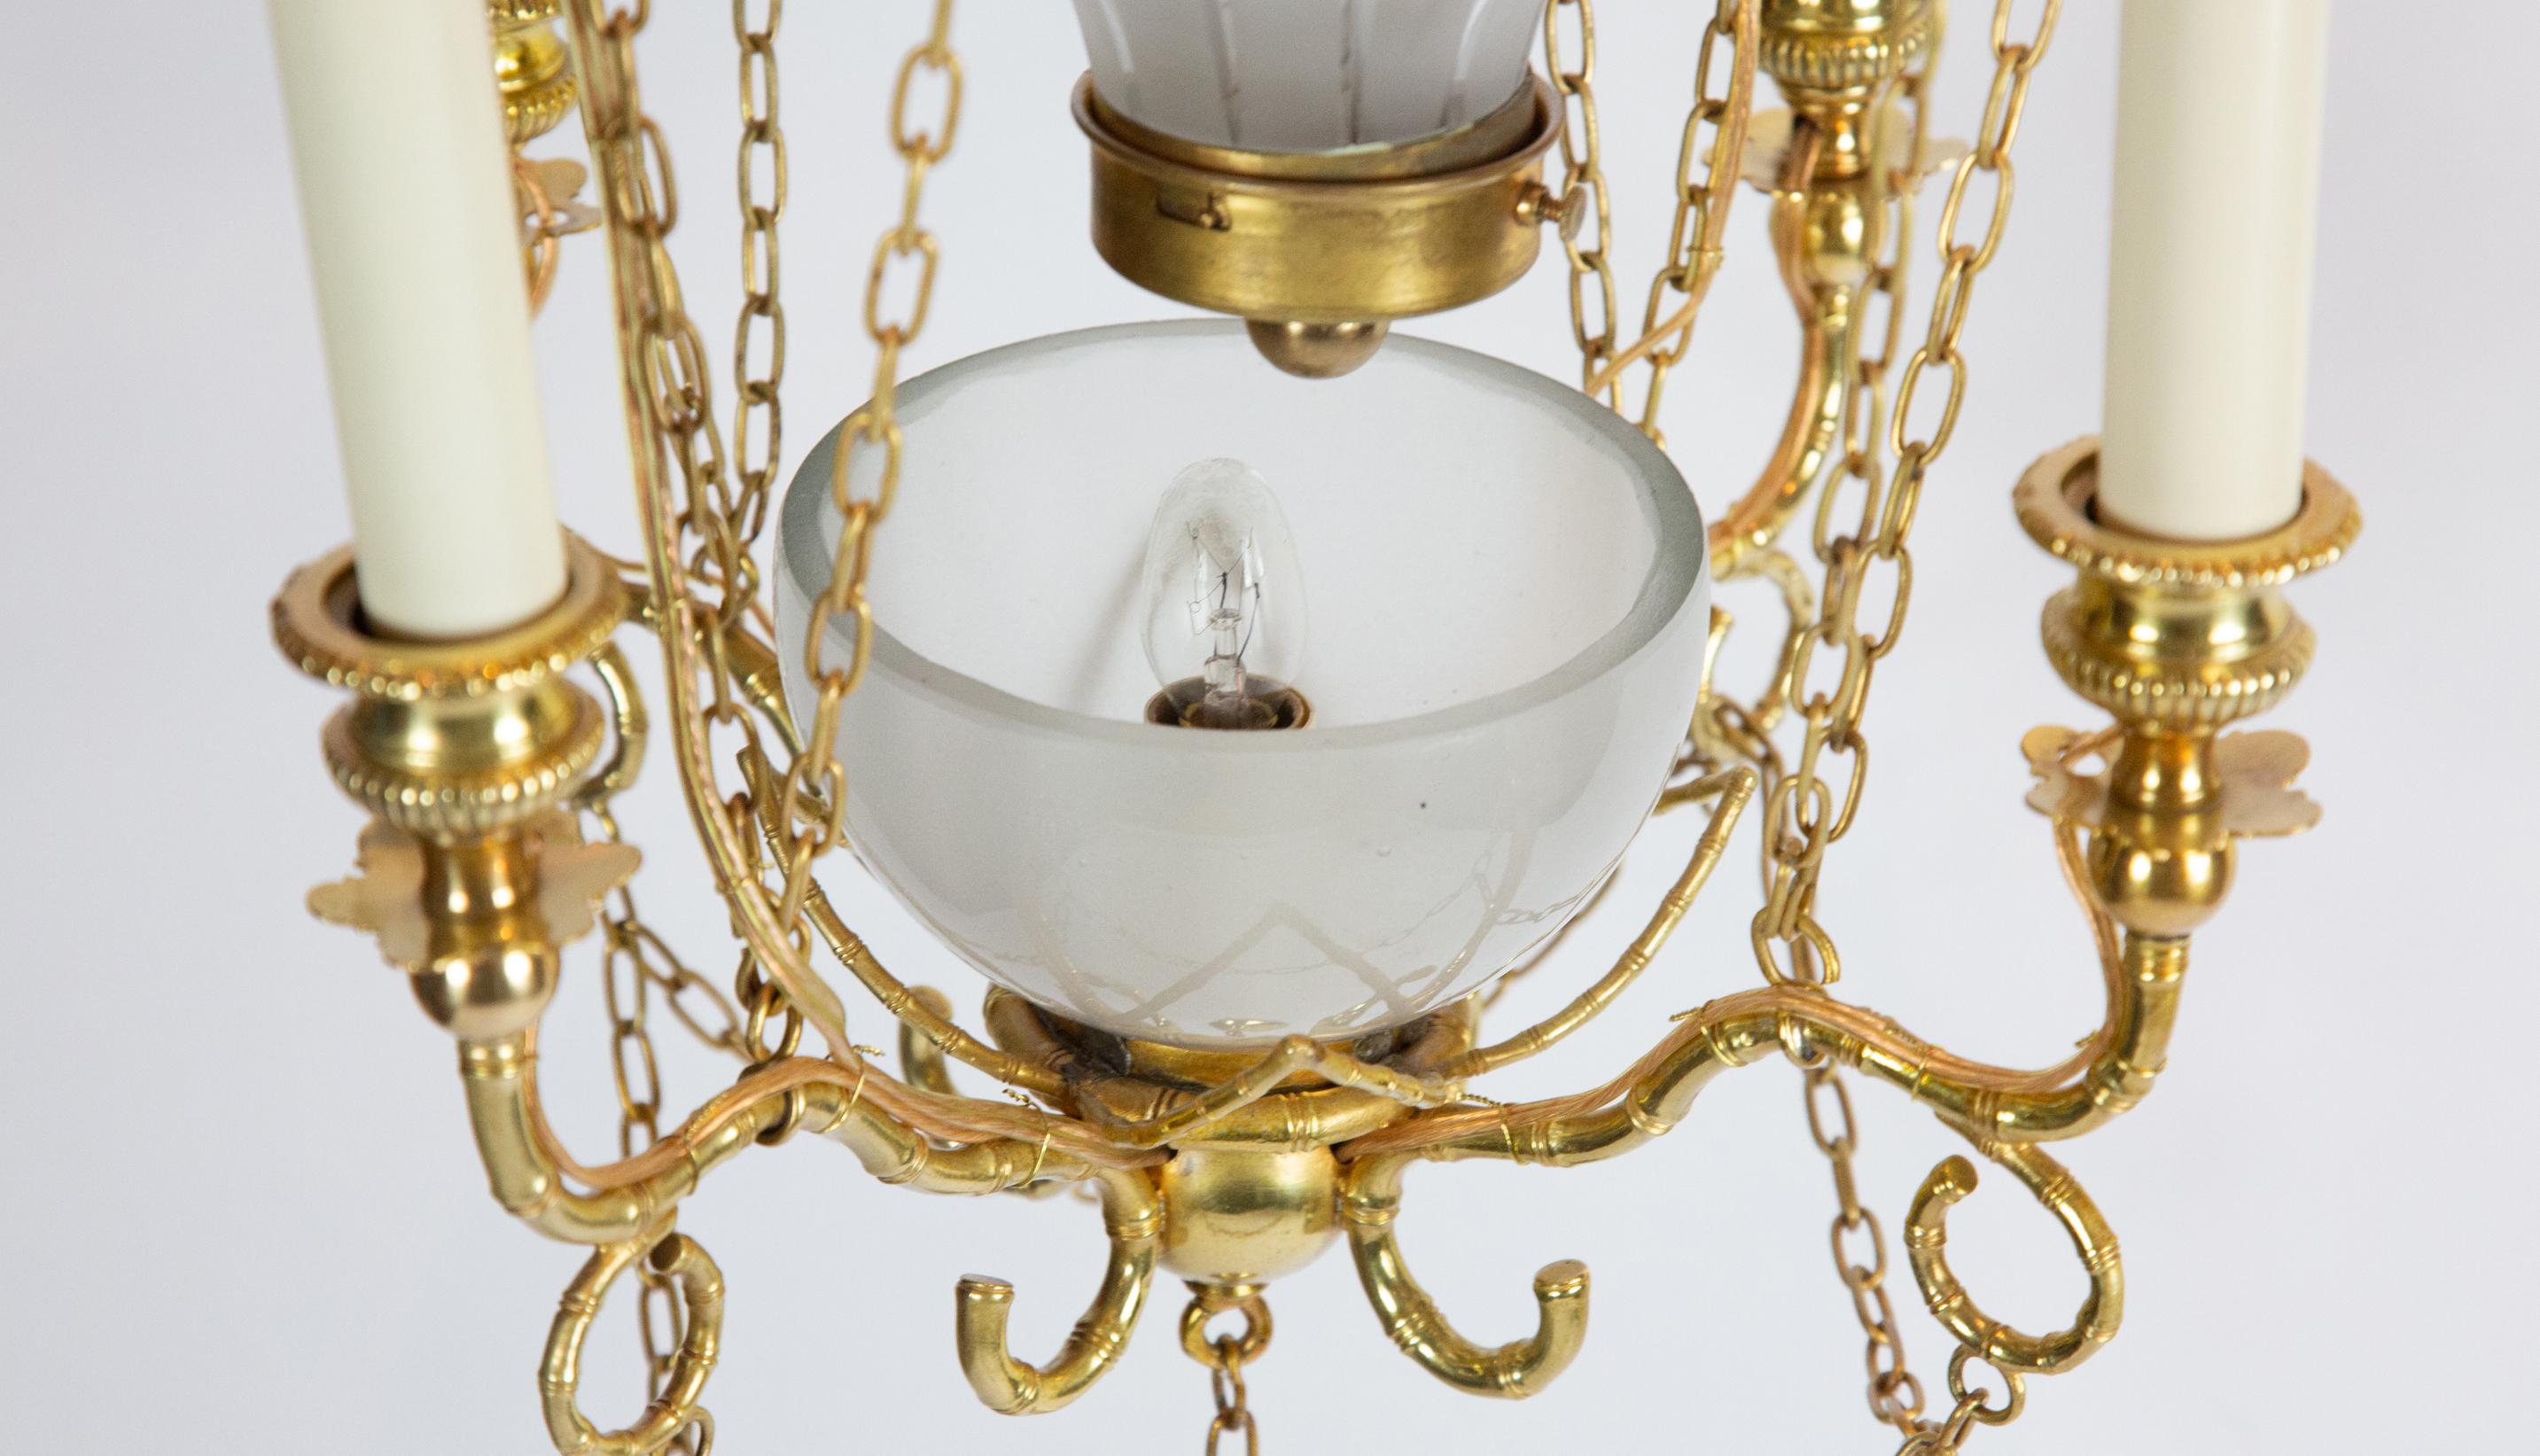 20th century gilt five-light ormolu and glass Montgolfier hot air balloon chandelier. Four arms, with one light in center frosted glass enclosure. Inspired by Montgolfier-style hot air balloon, the first practical hot air balloon, invented by the